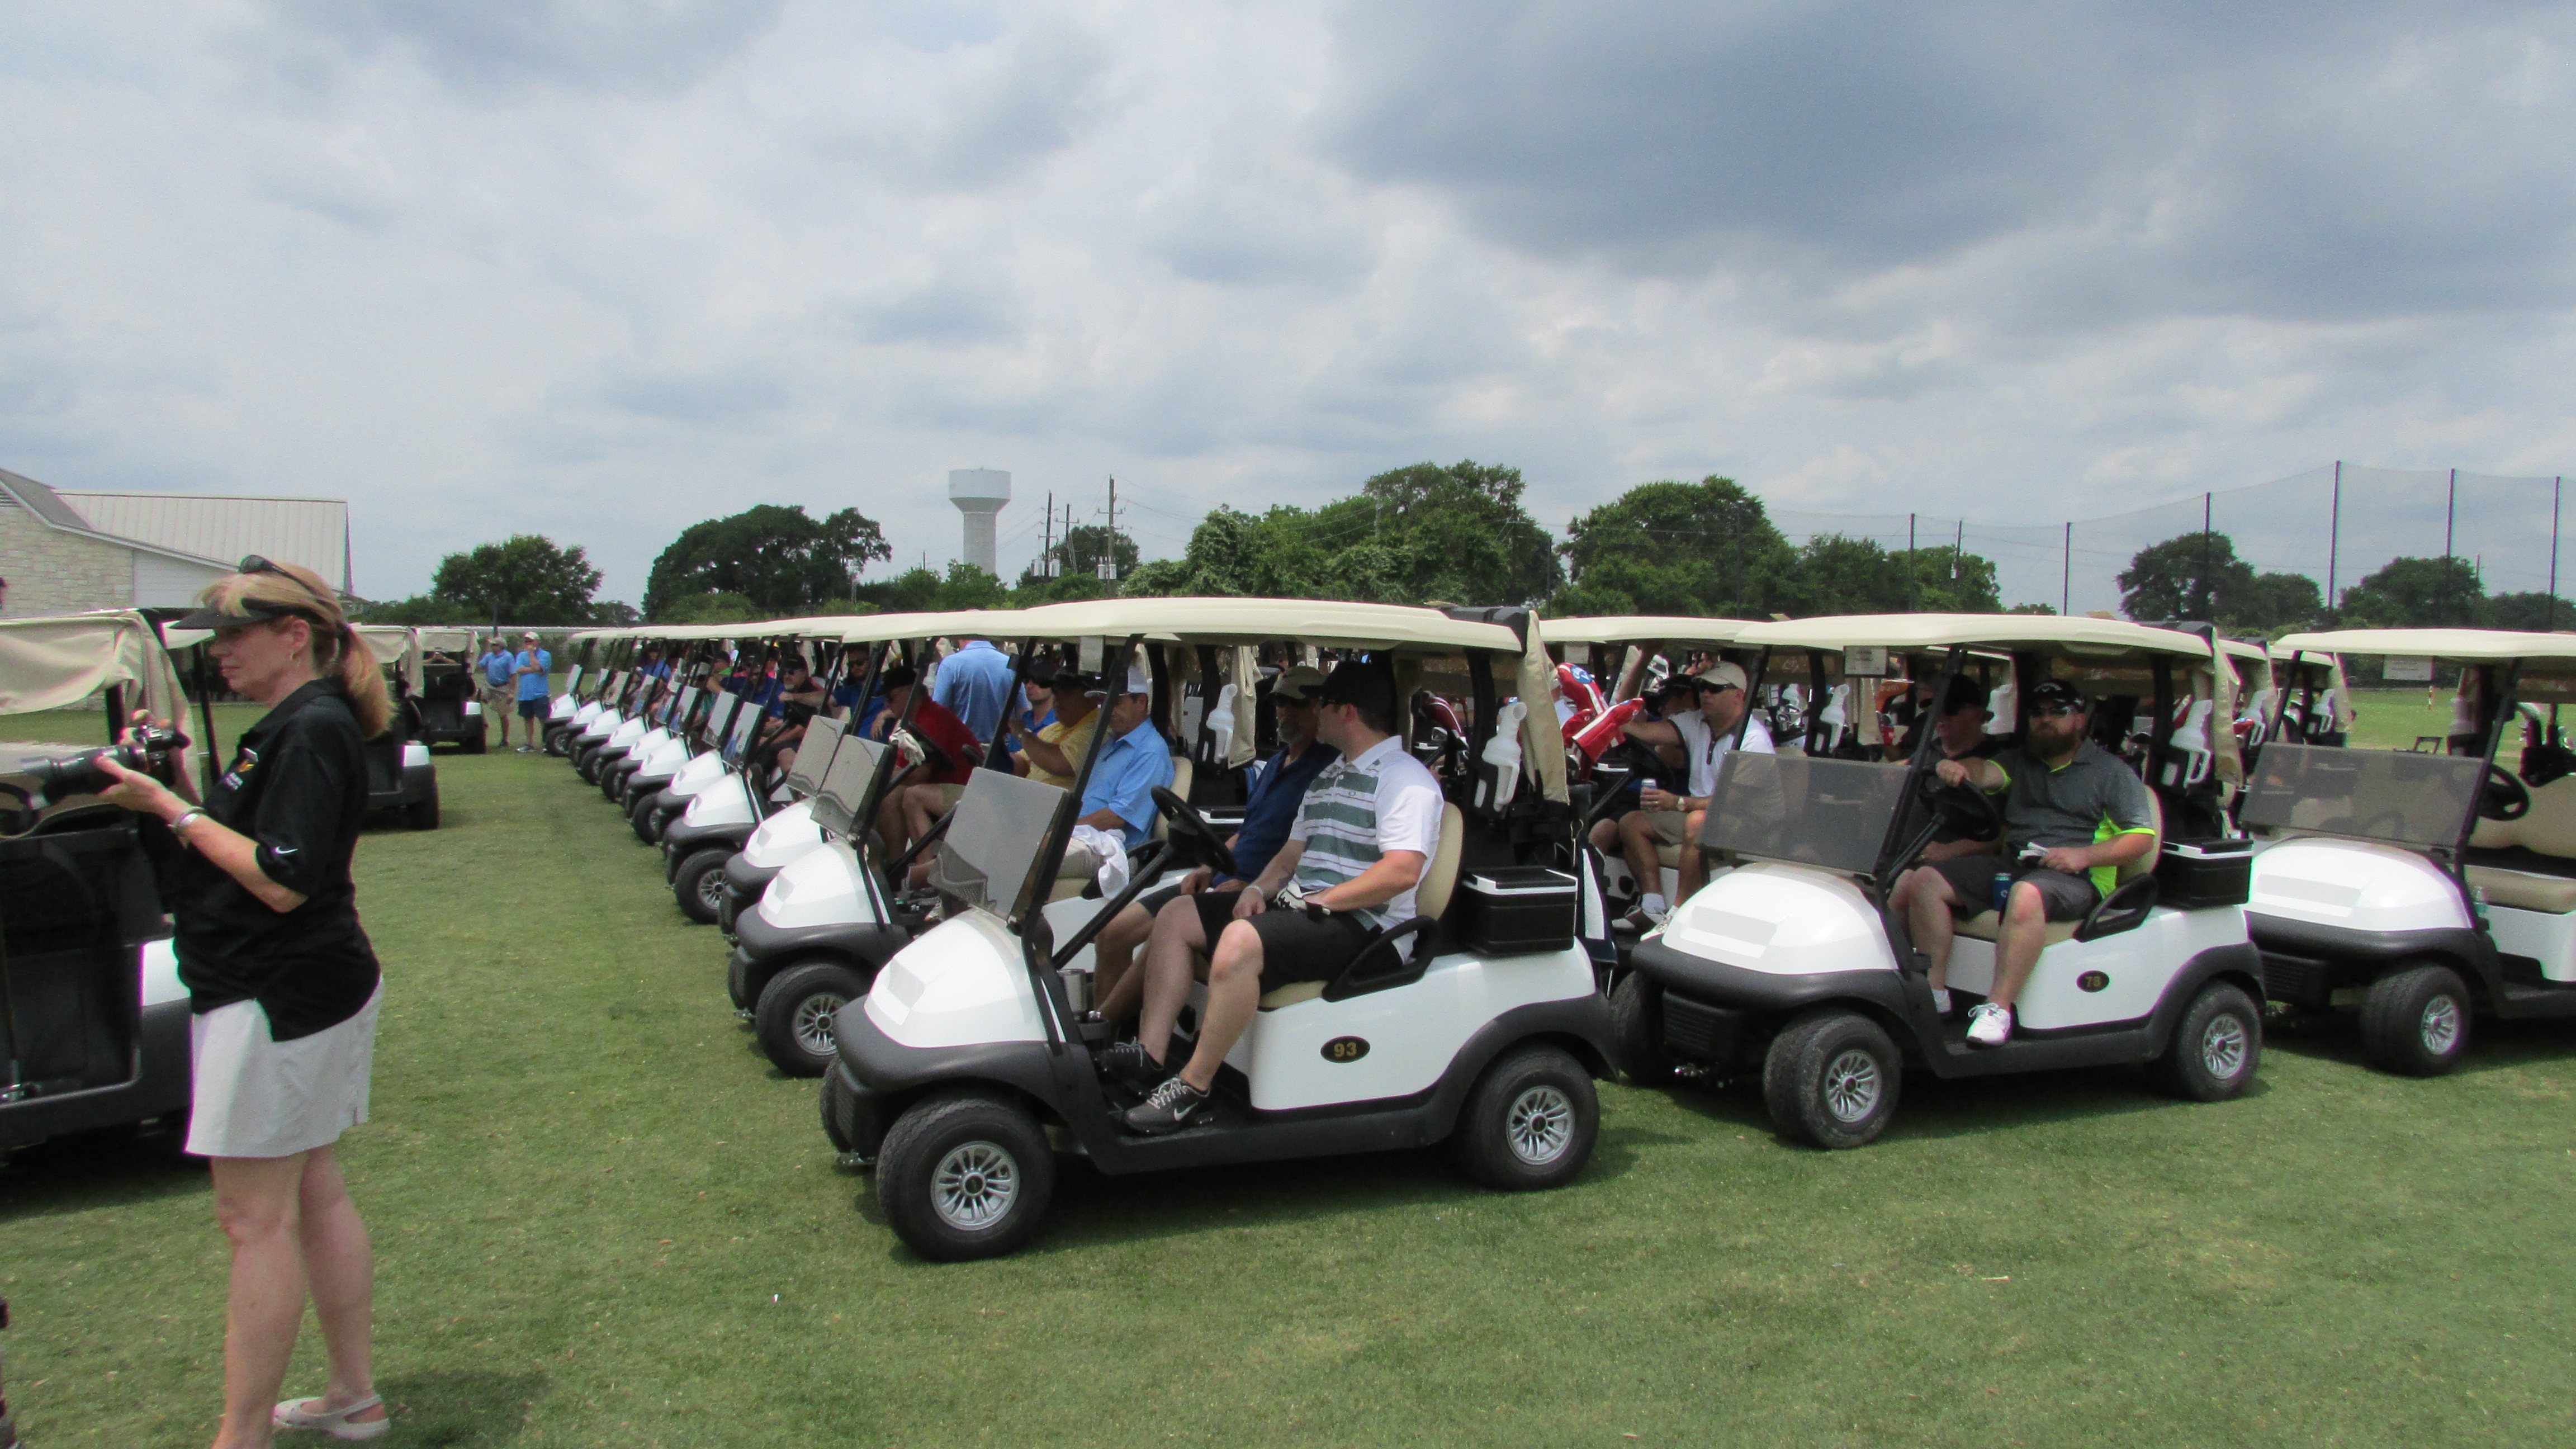 The 54 teams ready to tee off at the North Cypress Medical Center 9th Annual Golf Tournament.